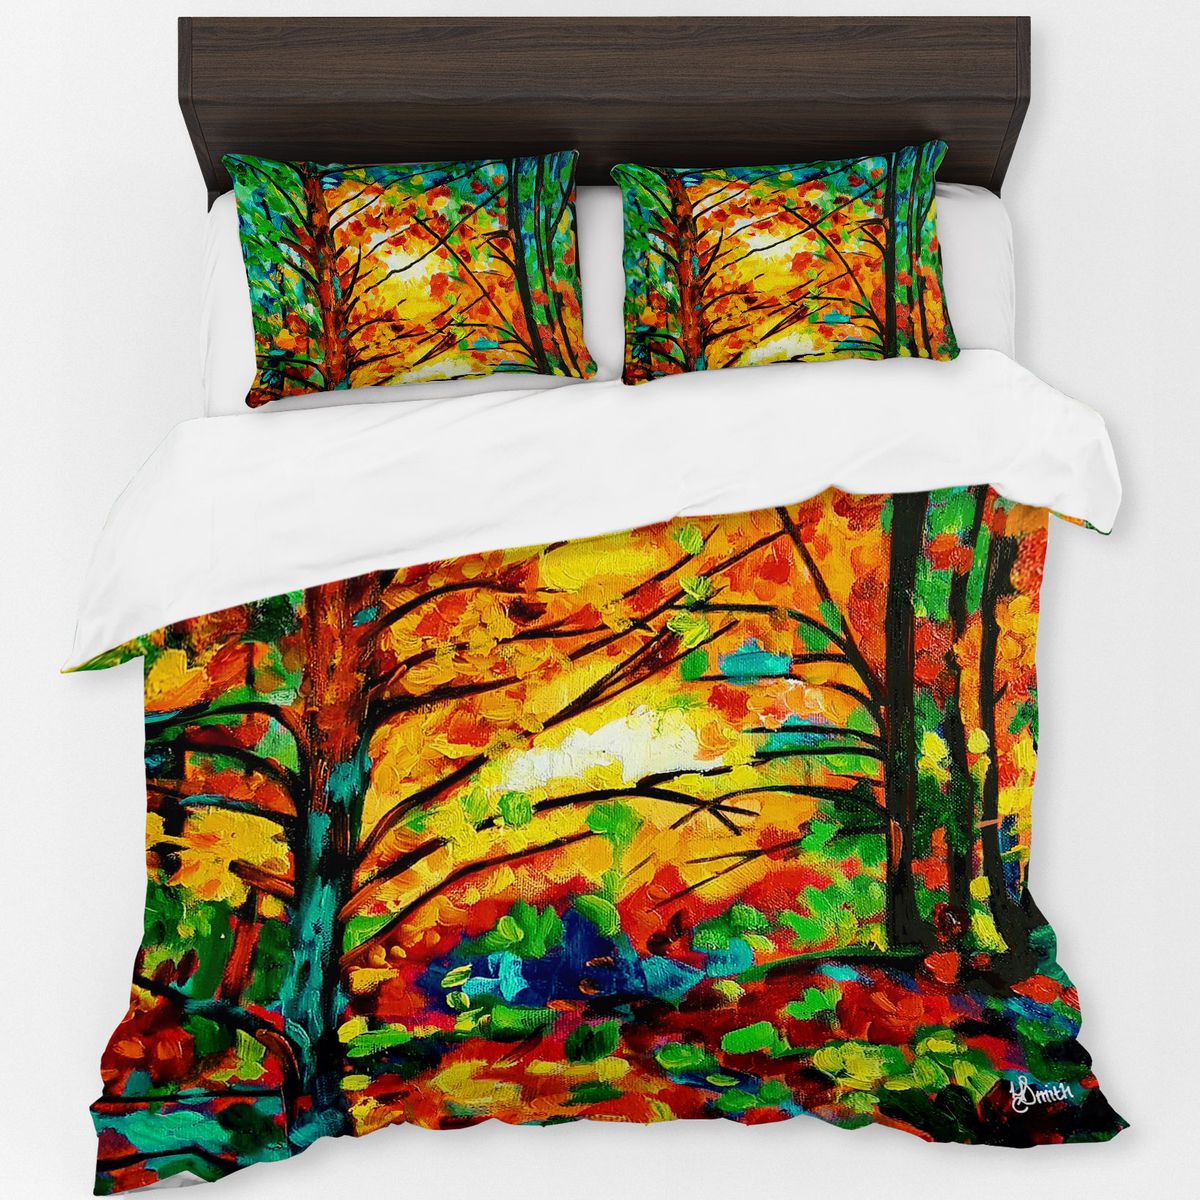 Trees By Yolande Smith Duvet Cover Set